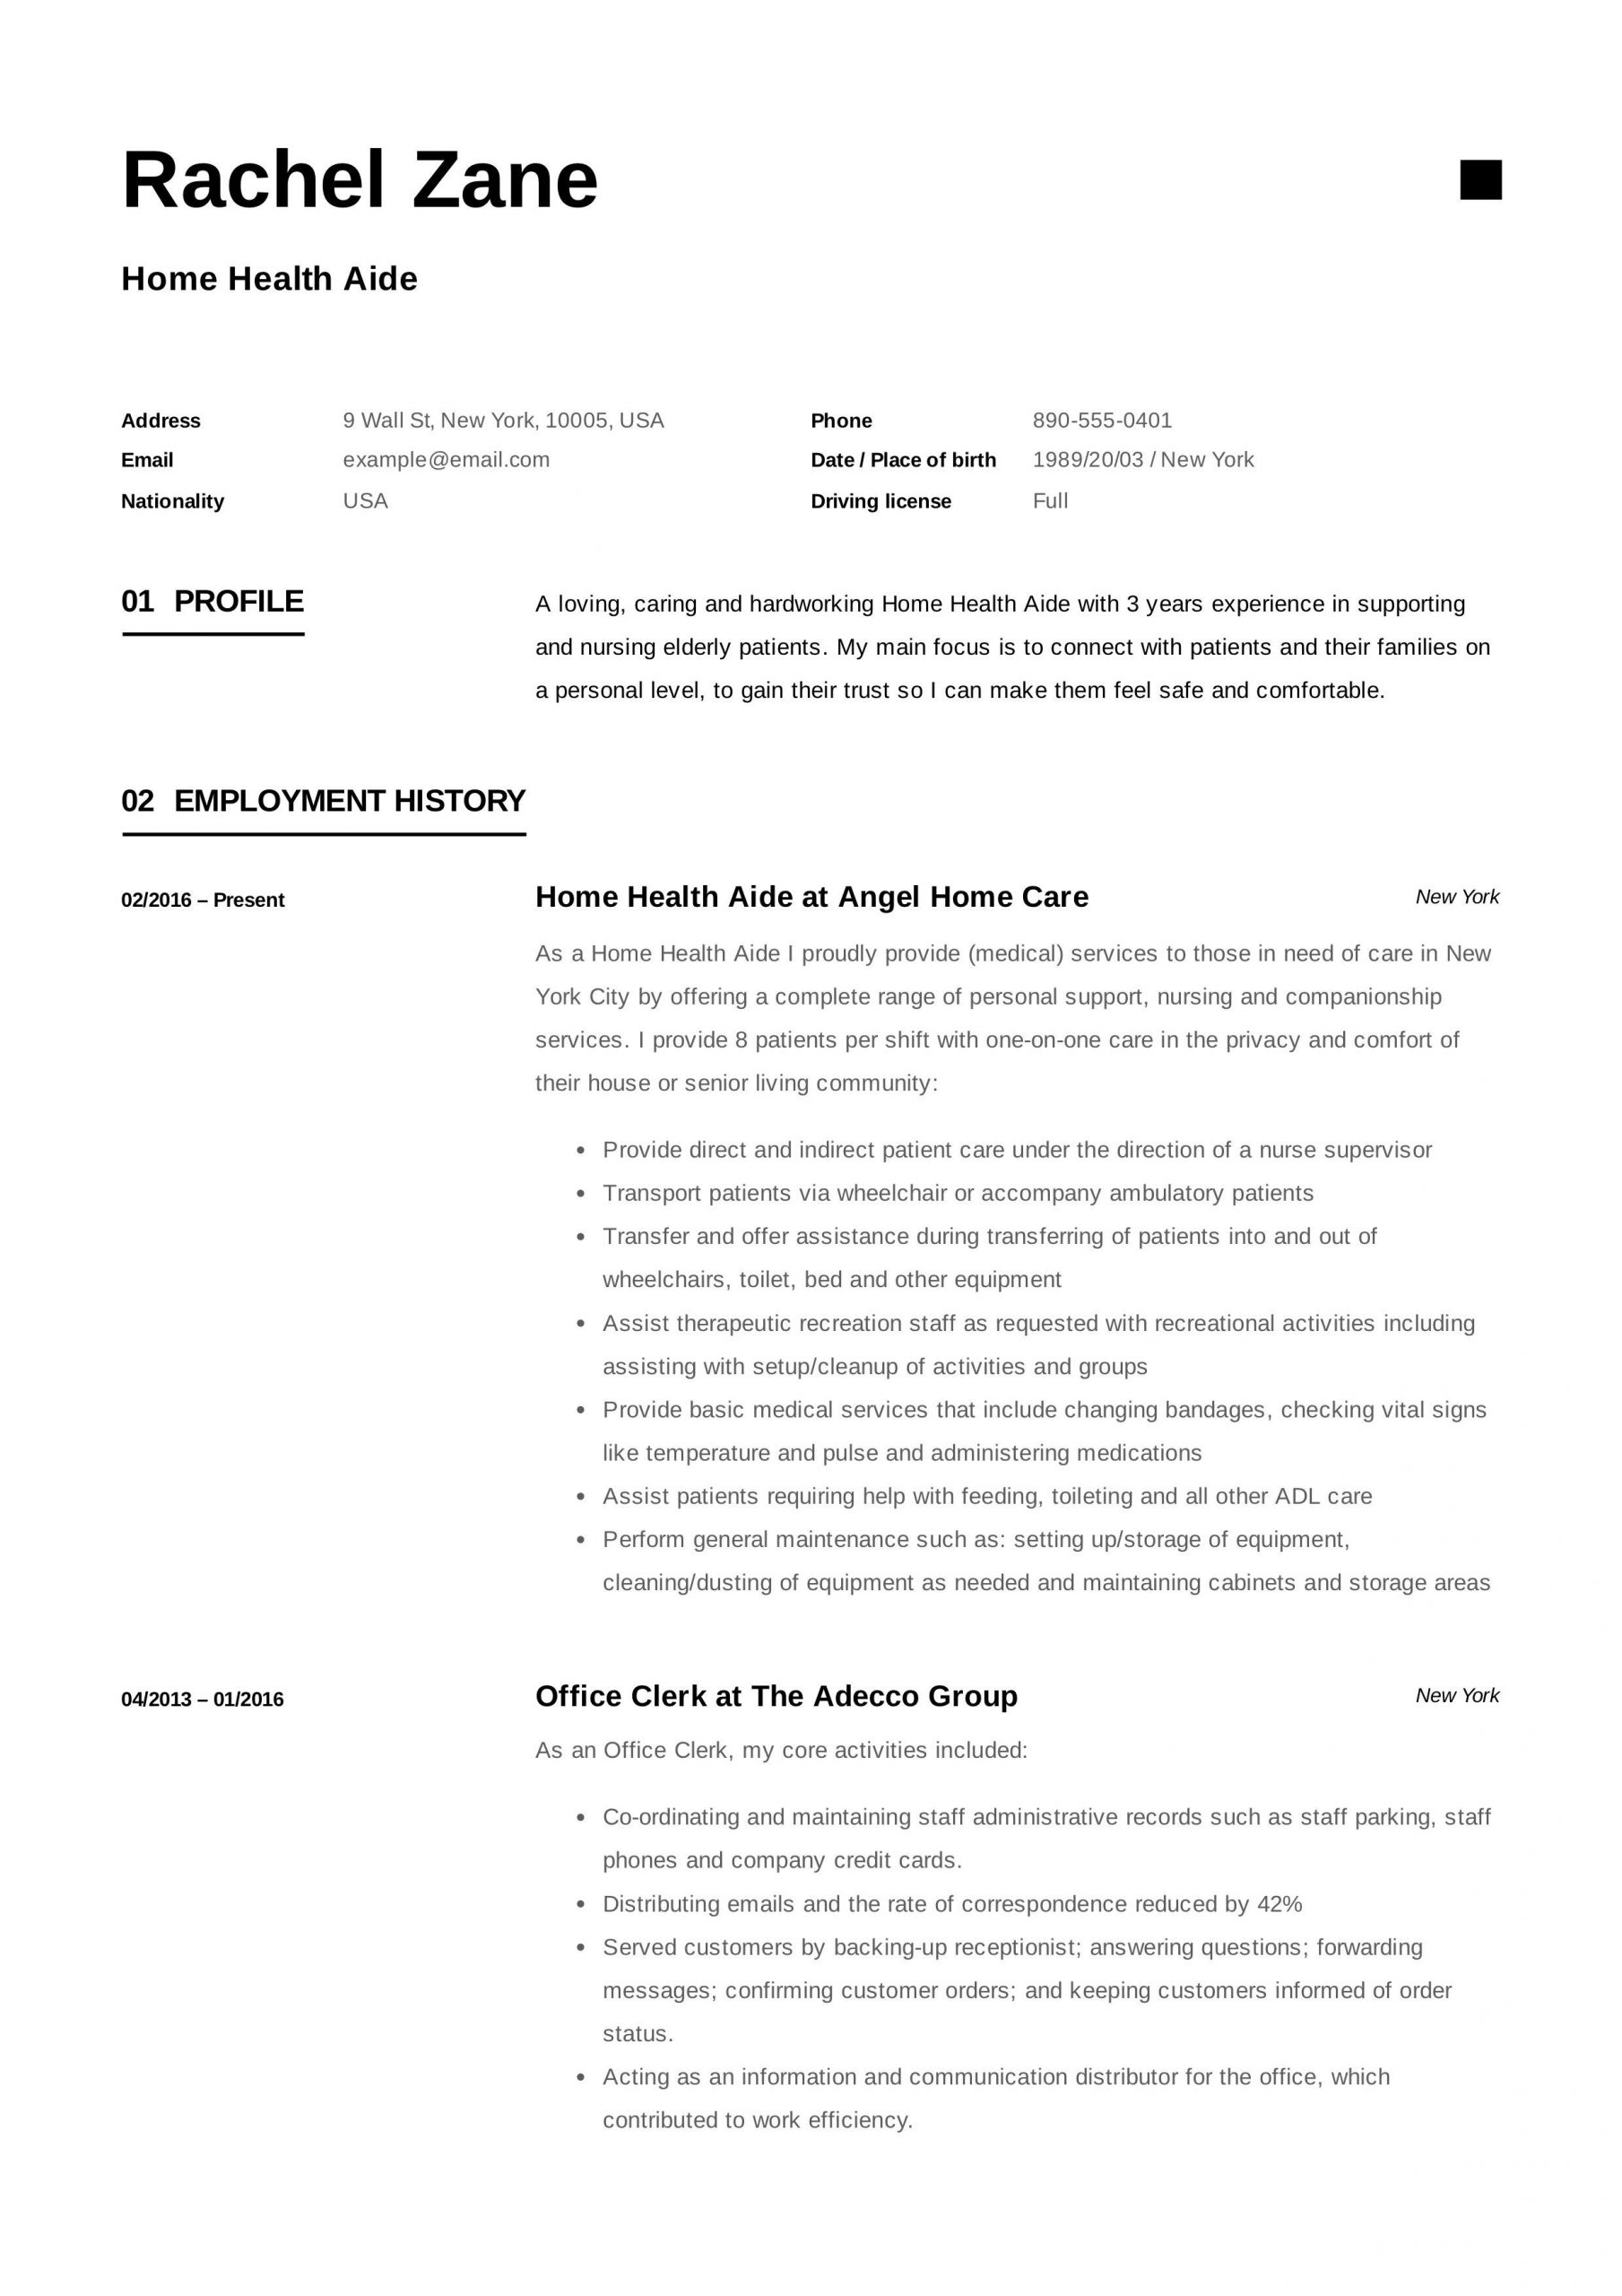 Sample Resume for Health Care Aide Job 11 Home Health Aide Resume Examples Ideas Home Health Aide …